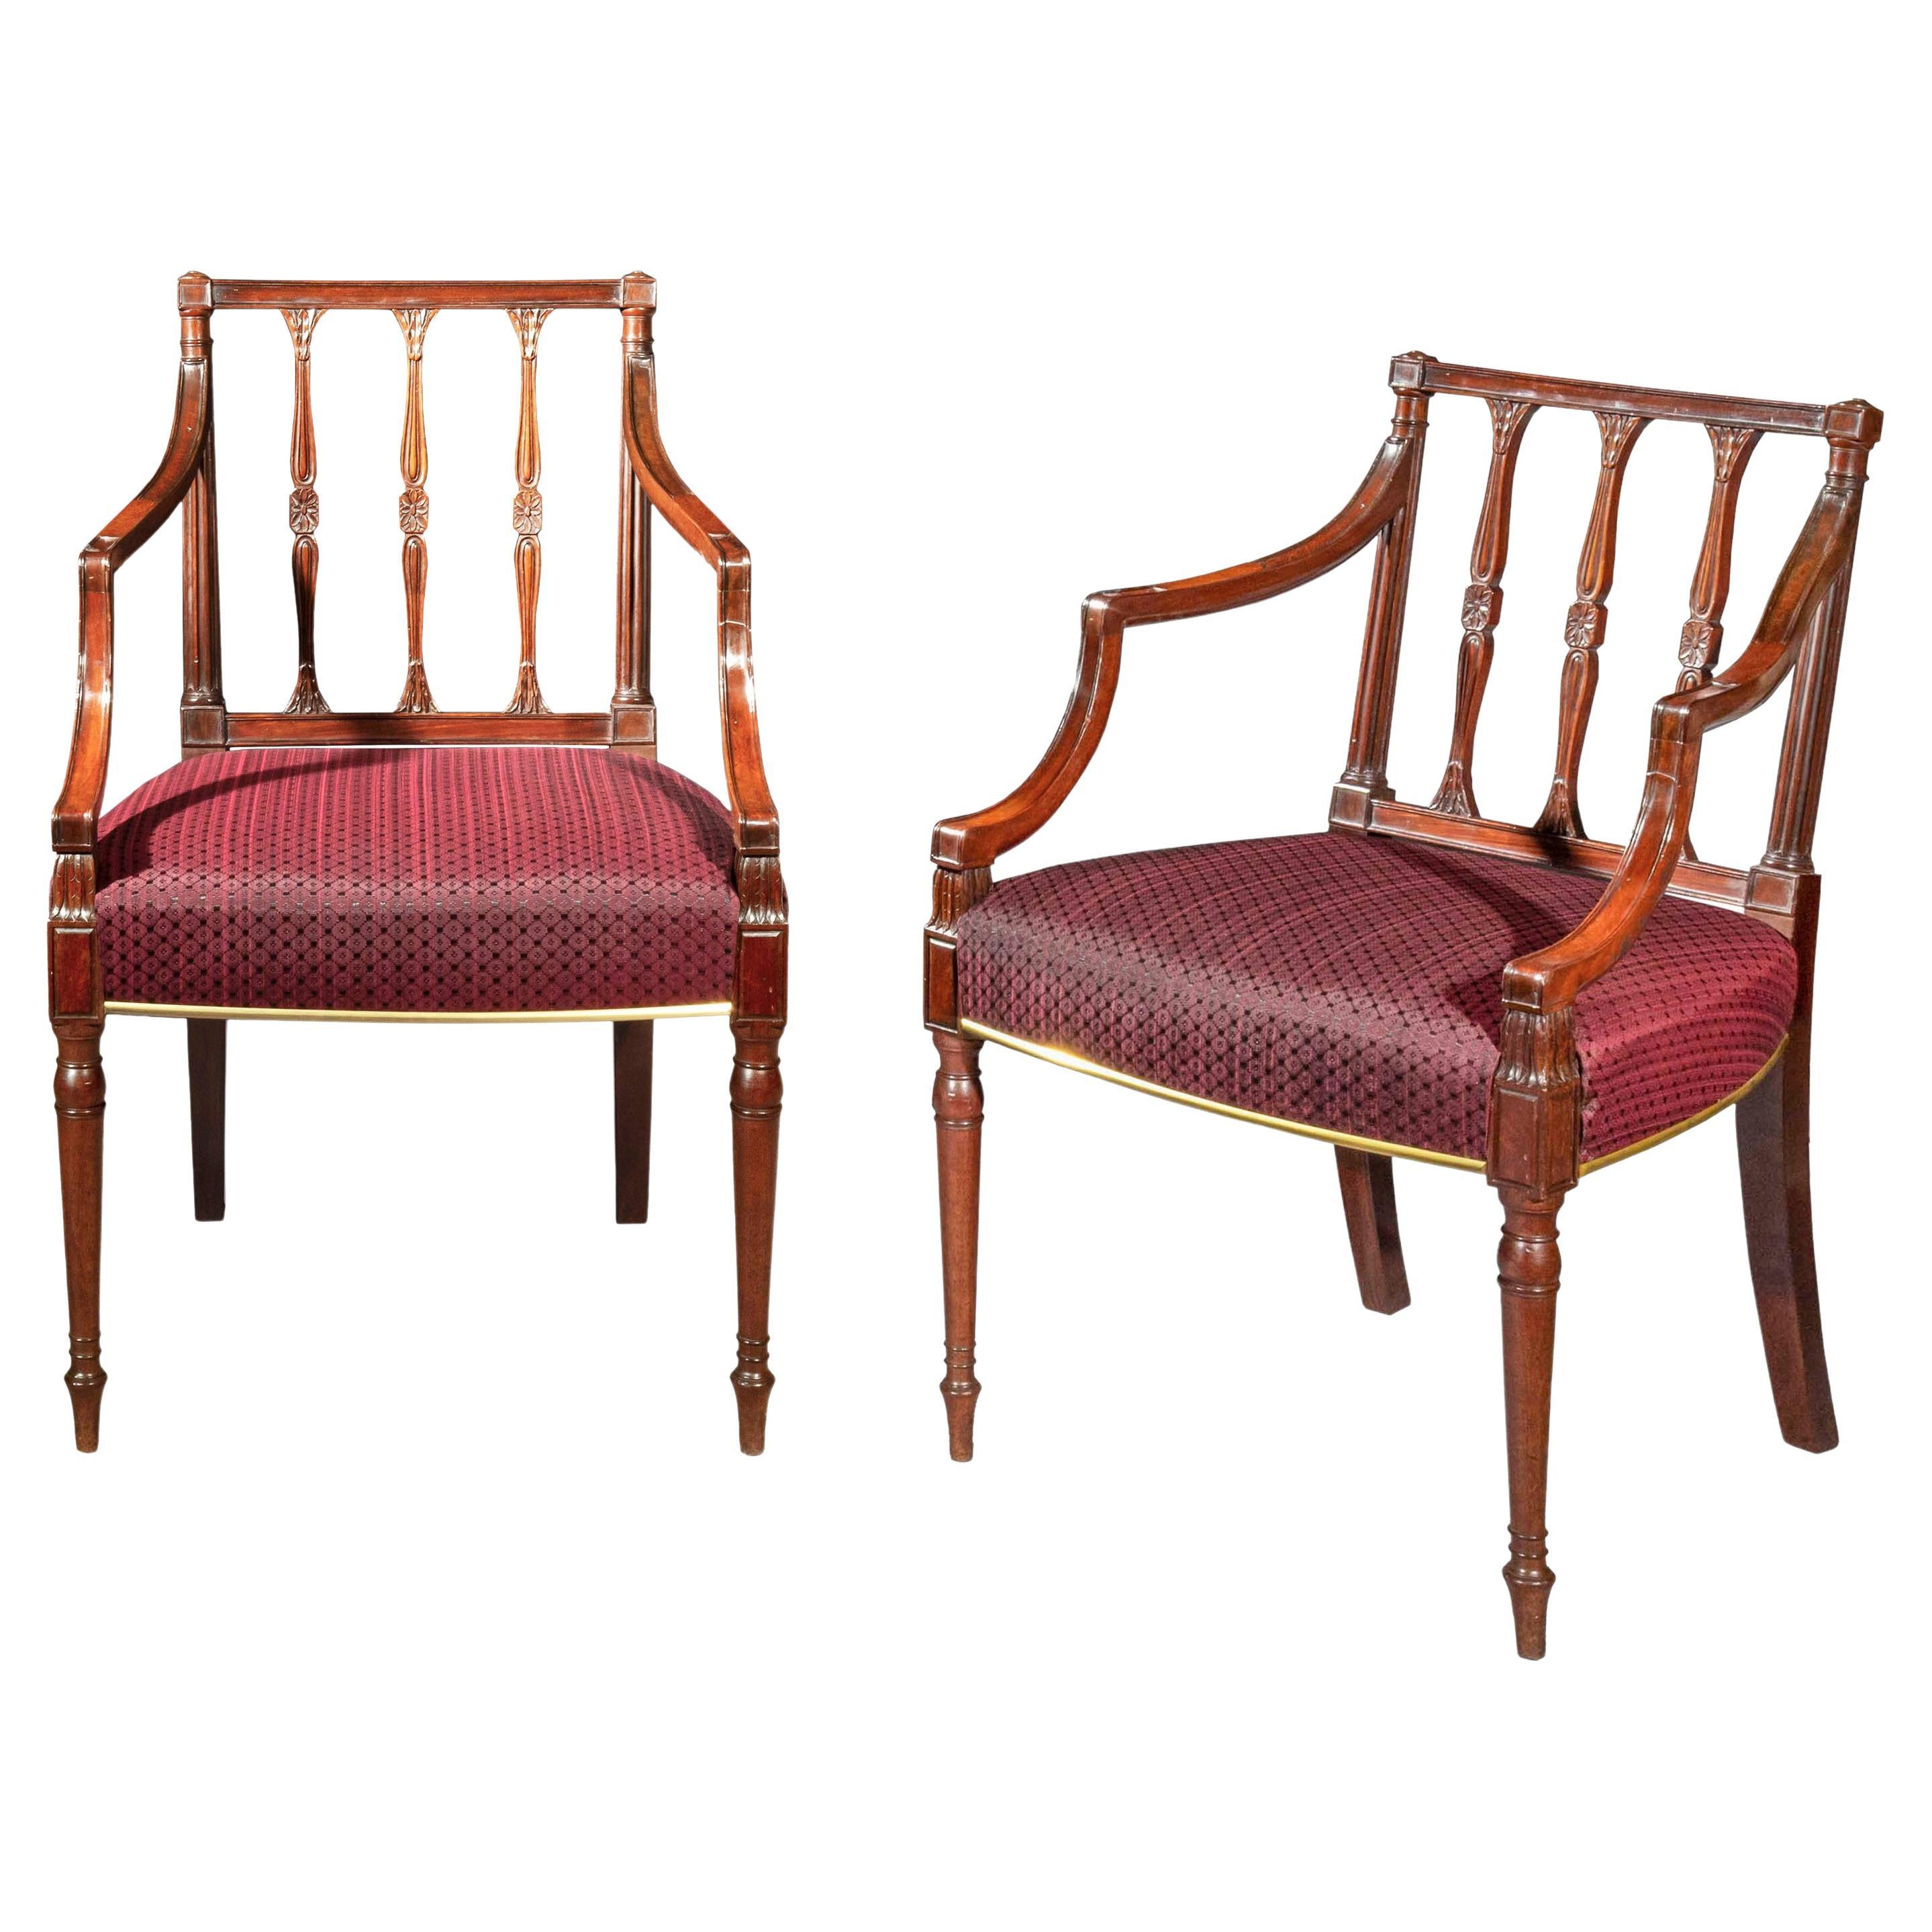 Pair Of Georgian Armchairs, Late 18th Century For Sale